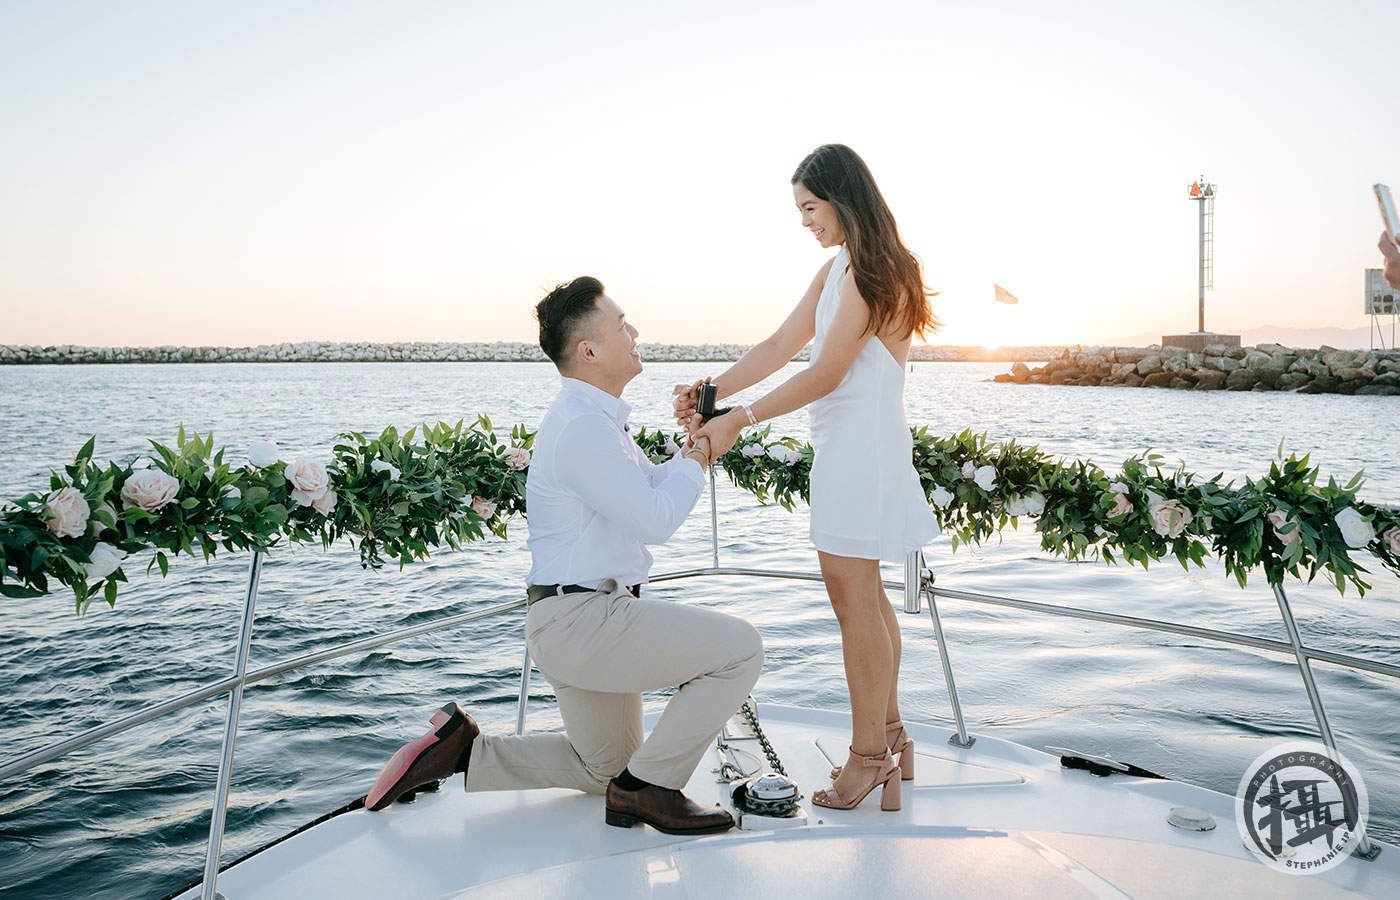 Surprise Proposal and Engagement Photography in Marina Del Rey Los Angeles California